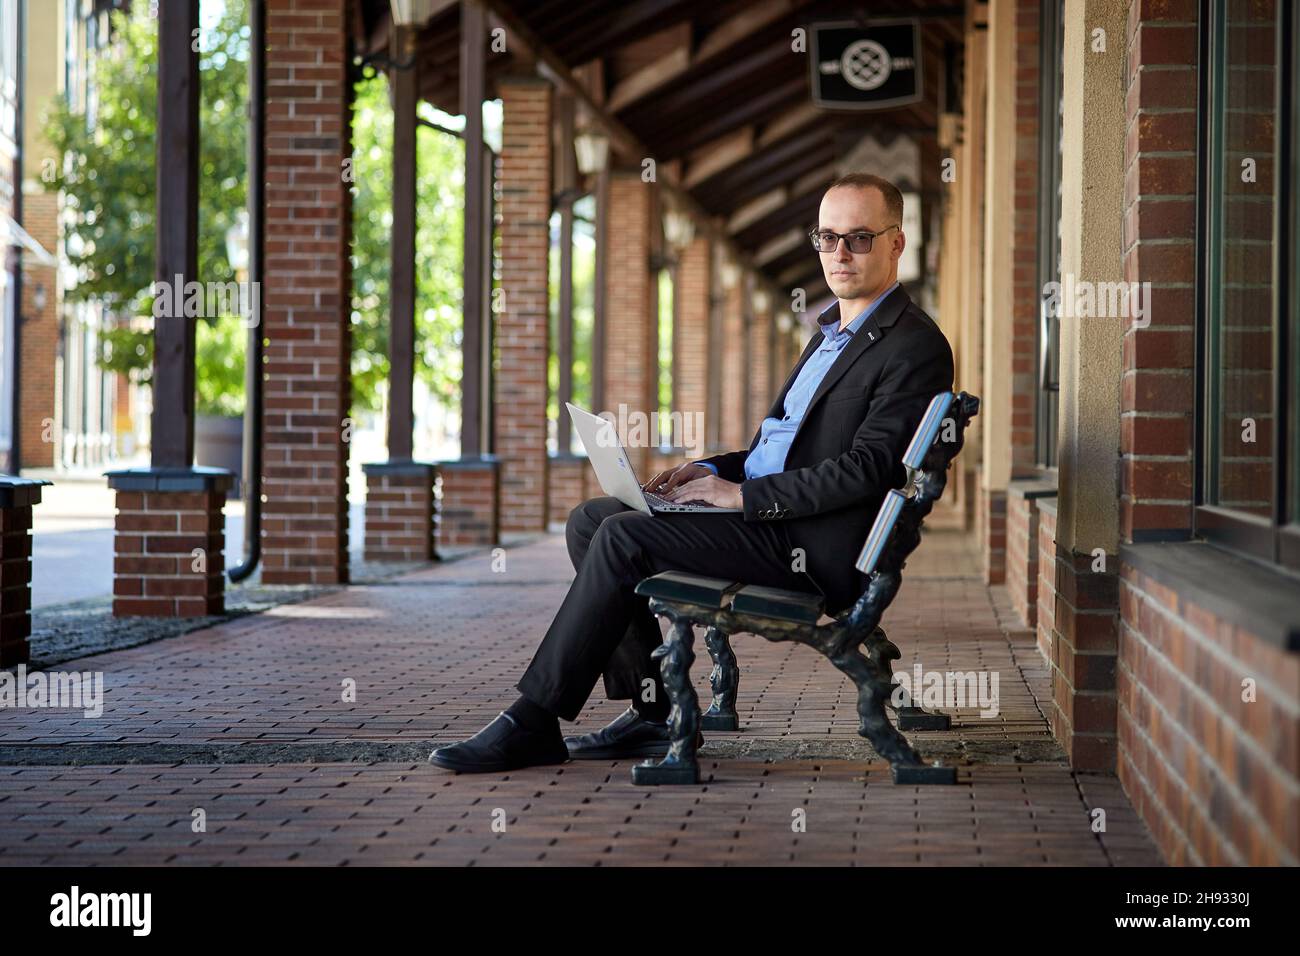 Successful businessman in a business suit working on his laptop outdoors Stock Photo